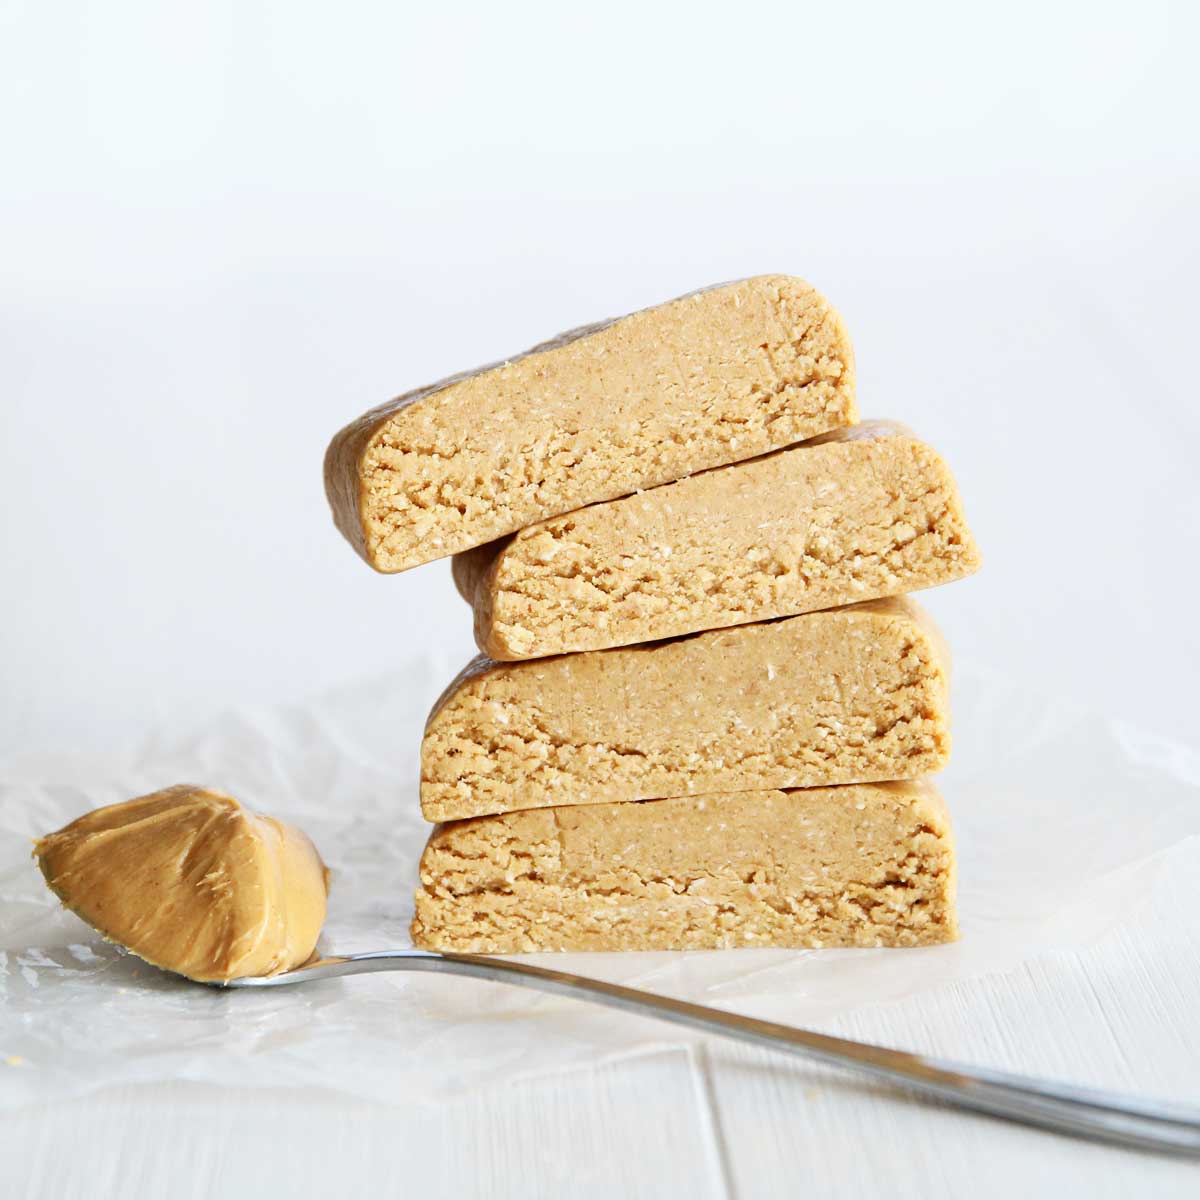 4-Ingredient Peanut Butter Oatmeal Protein Bars (Healthy, GF and Vegan) - Pistachio Nice Cream